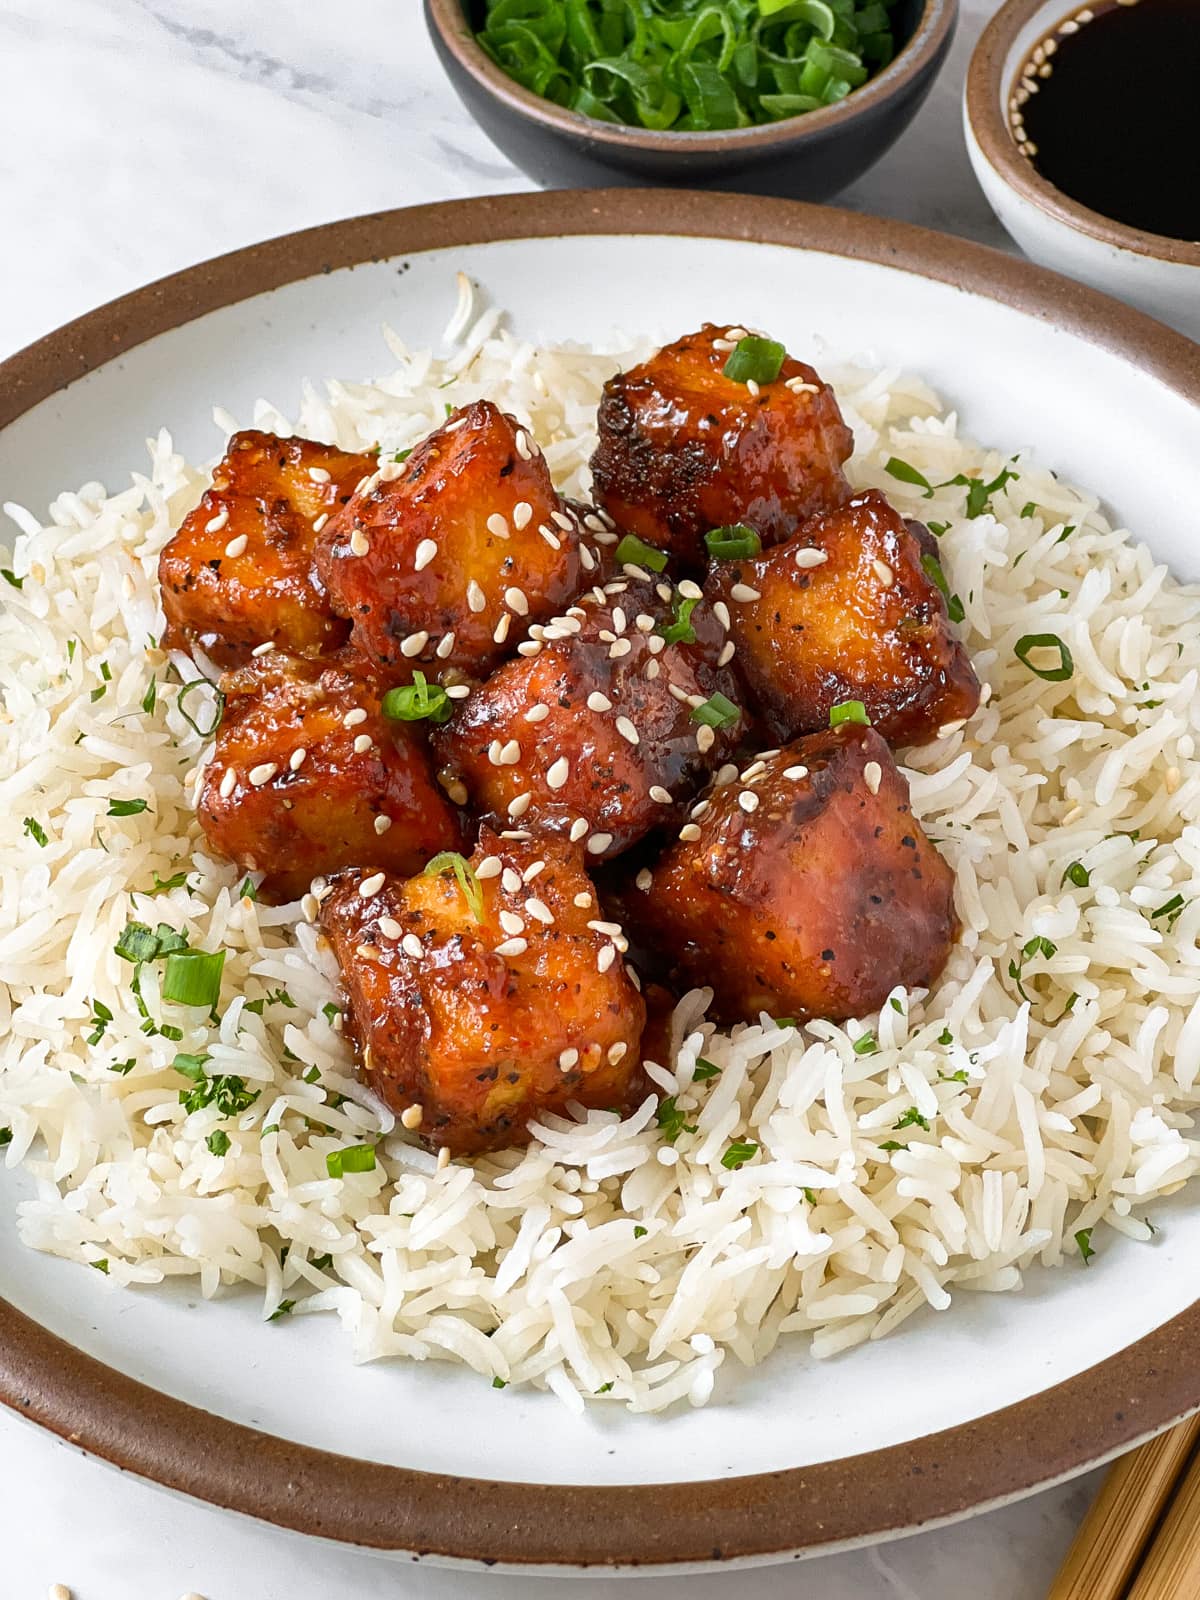 Crispy pan fried tofu in sesame ginger marinade served on a bed of rice.